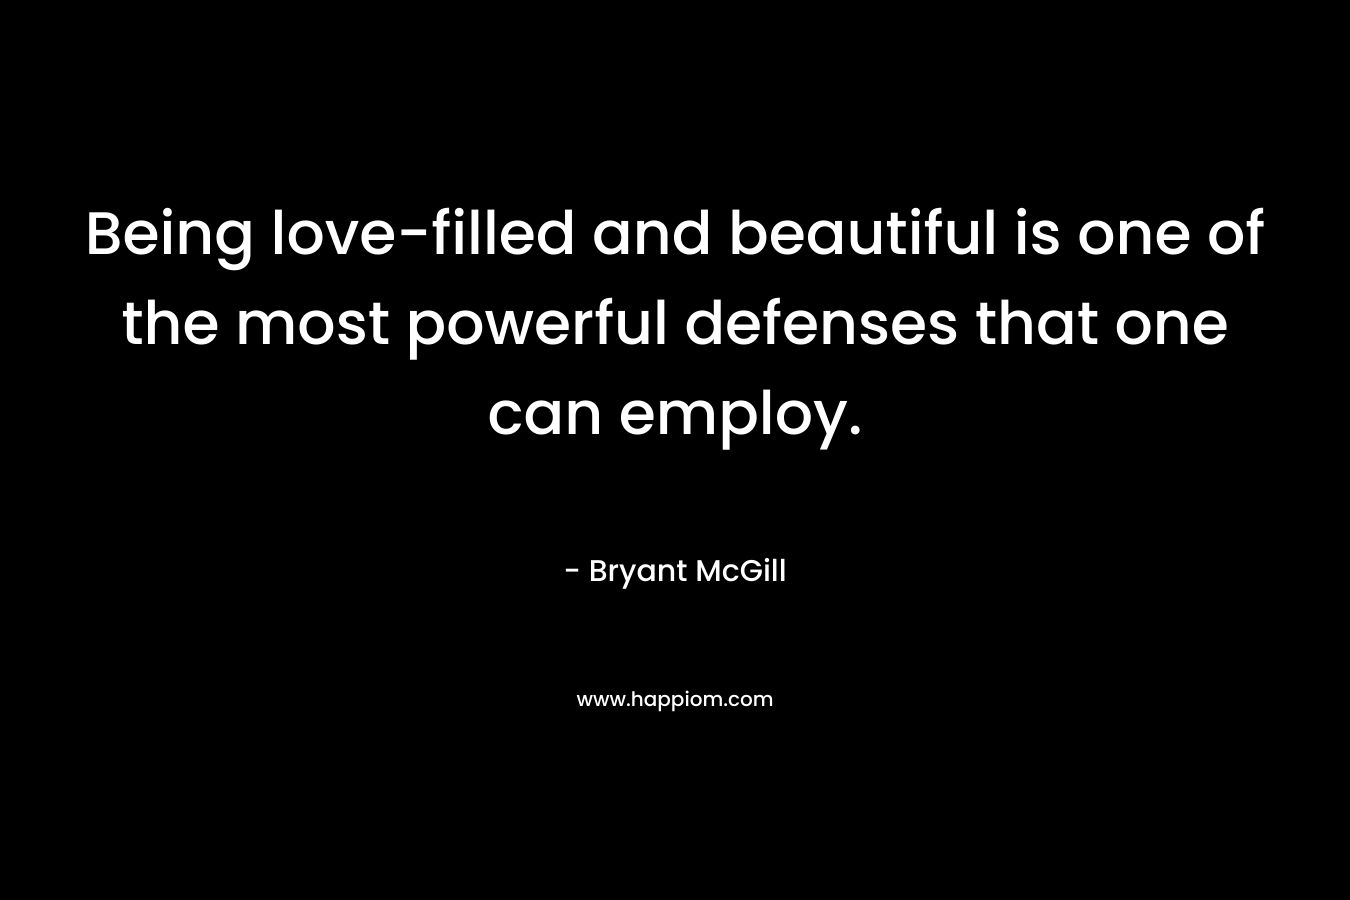 Being love-filled and beautiful is one of the most powerful defenses that one can employ.